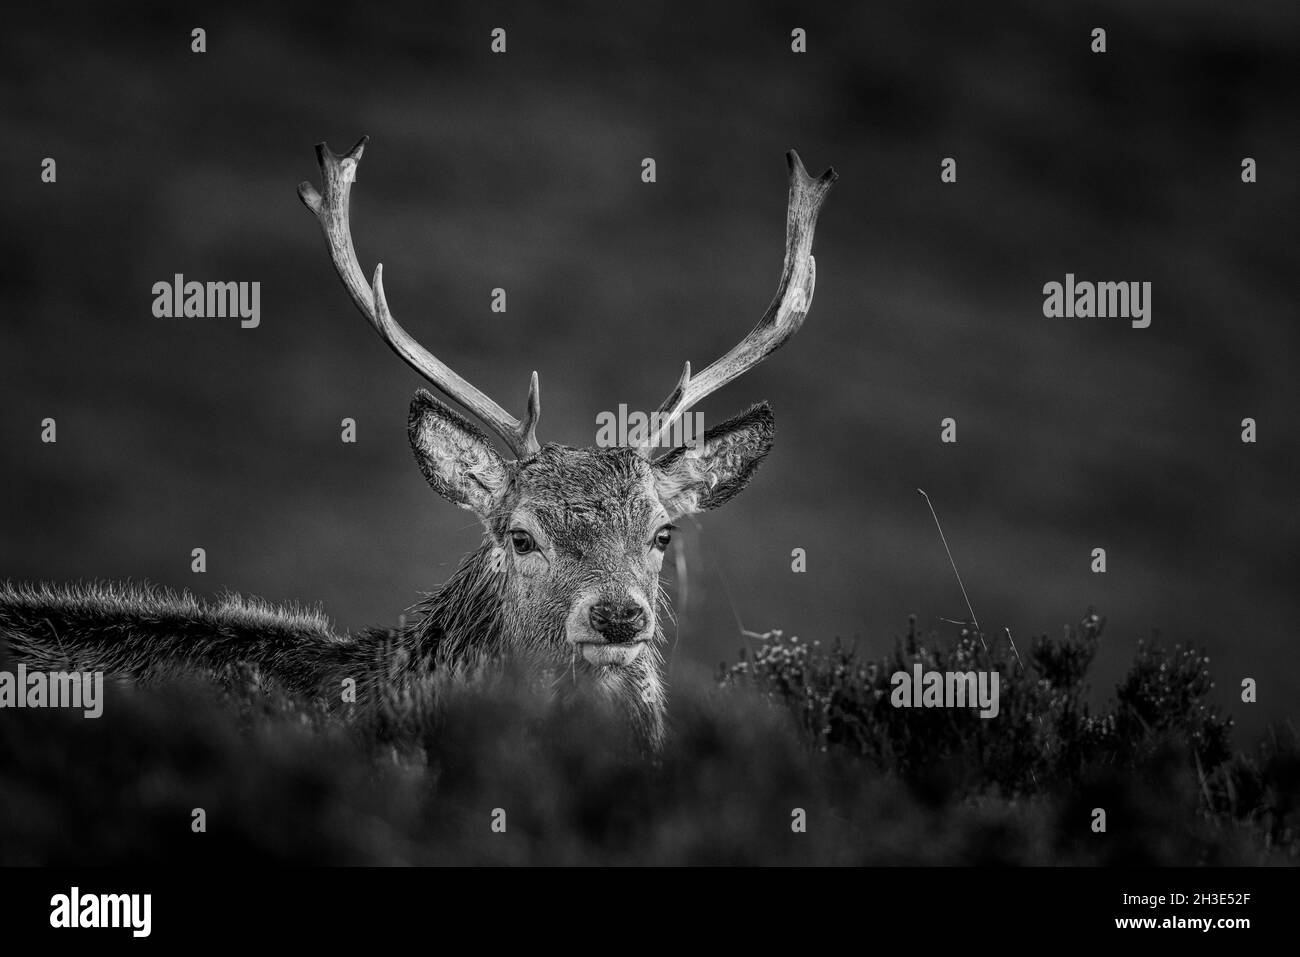 Red Deer stag in the Scottish Highlands. Stock Photo